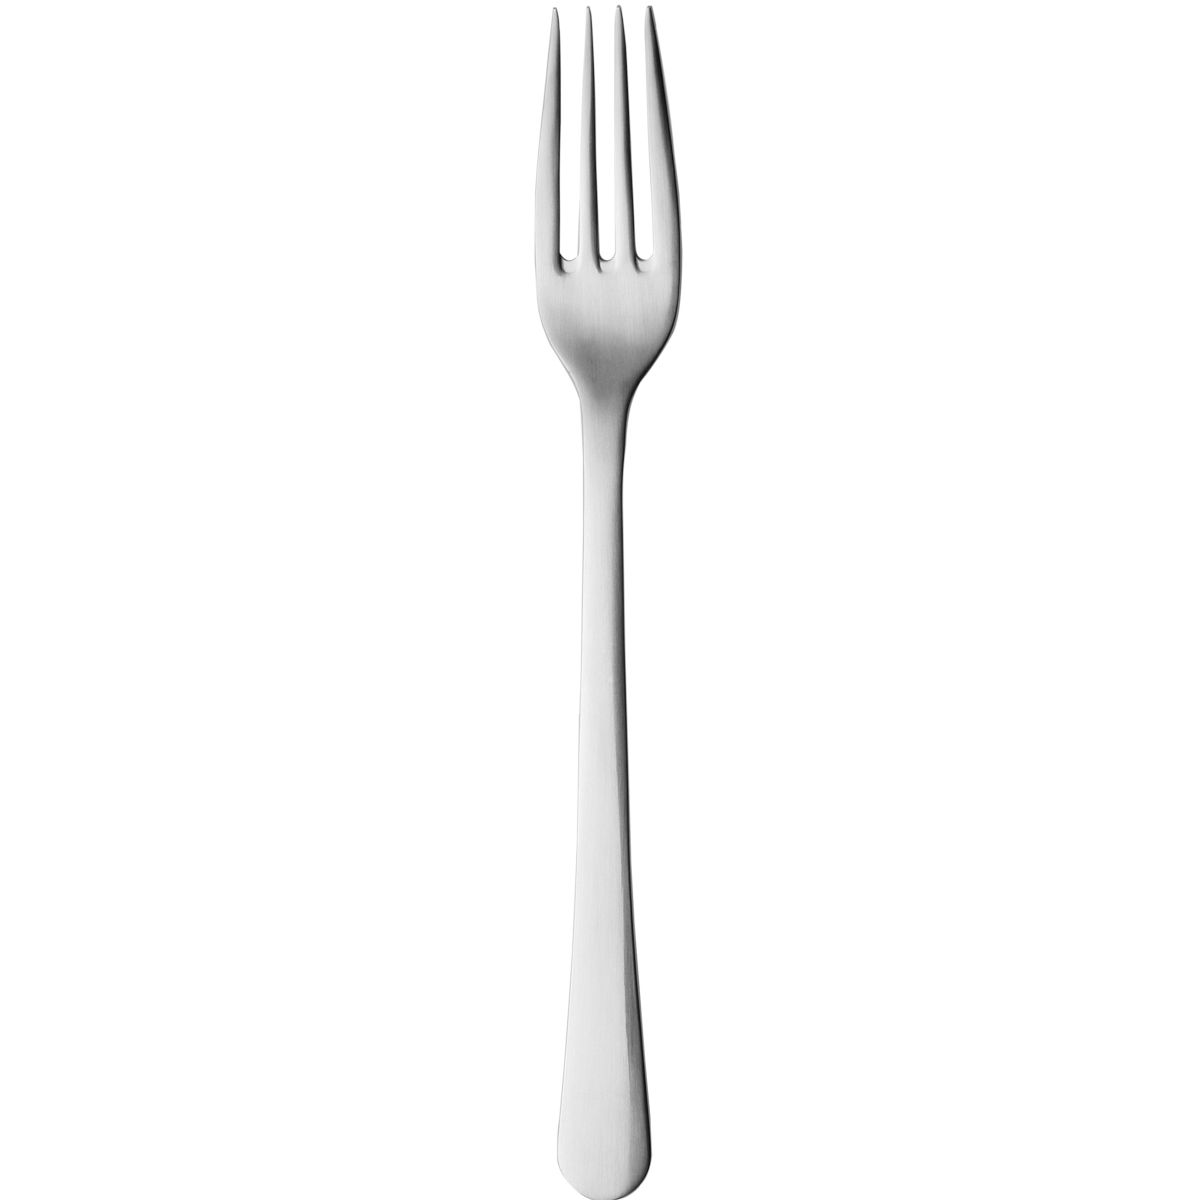 Free Fork Pictures, Download Free Fork Pictures png images, Free